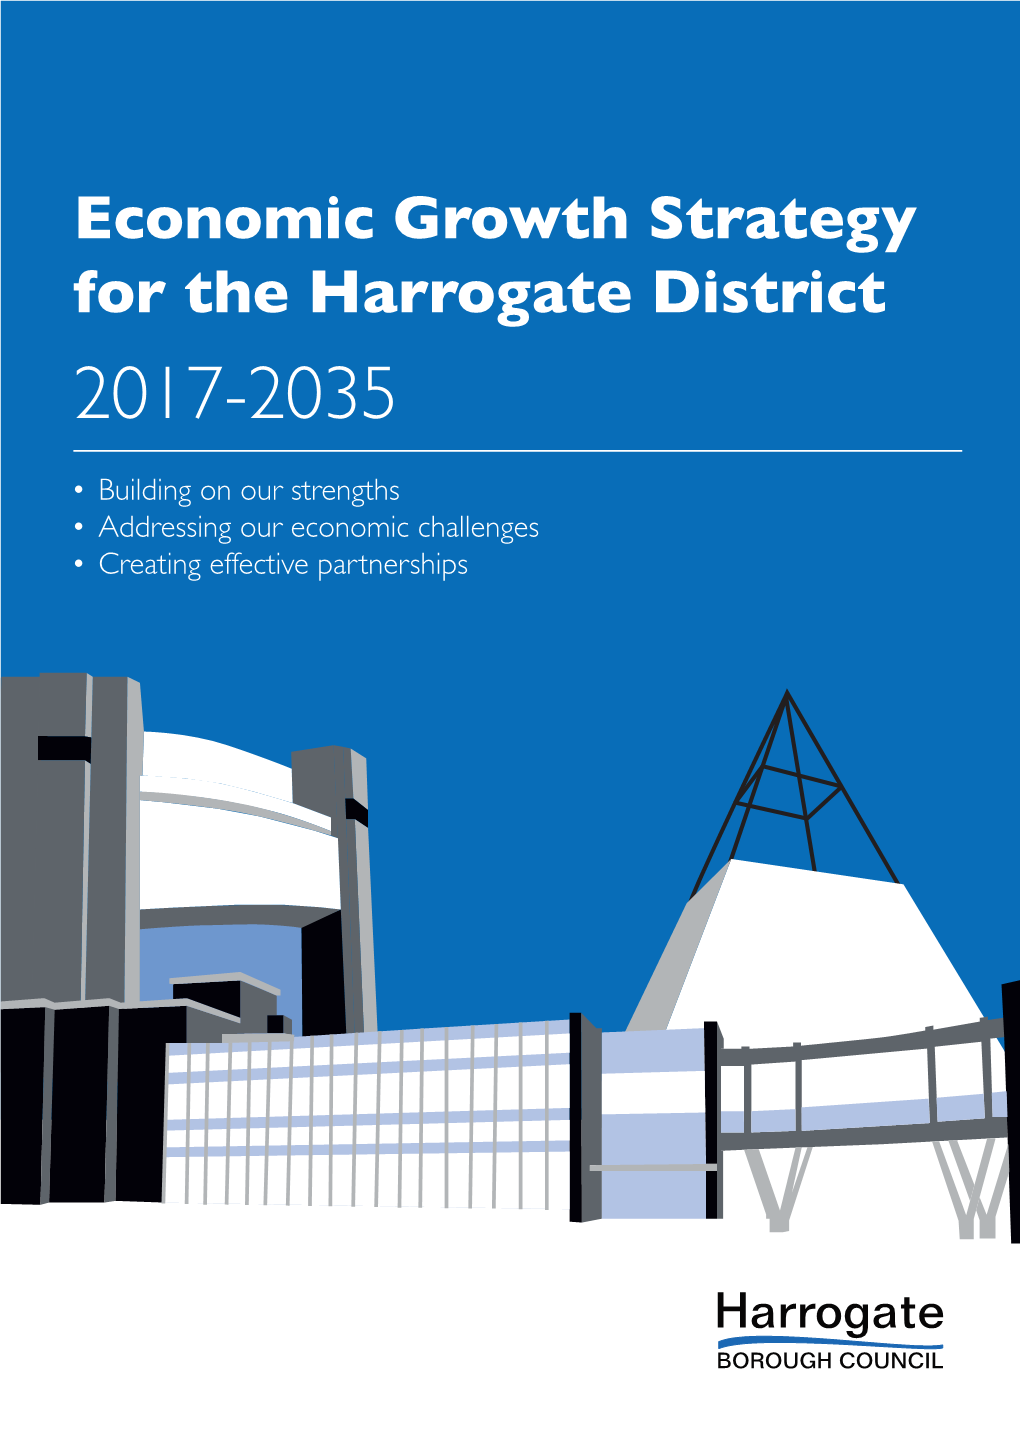 Economic Growth Strategy for the Harrogate District 2017-2035